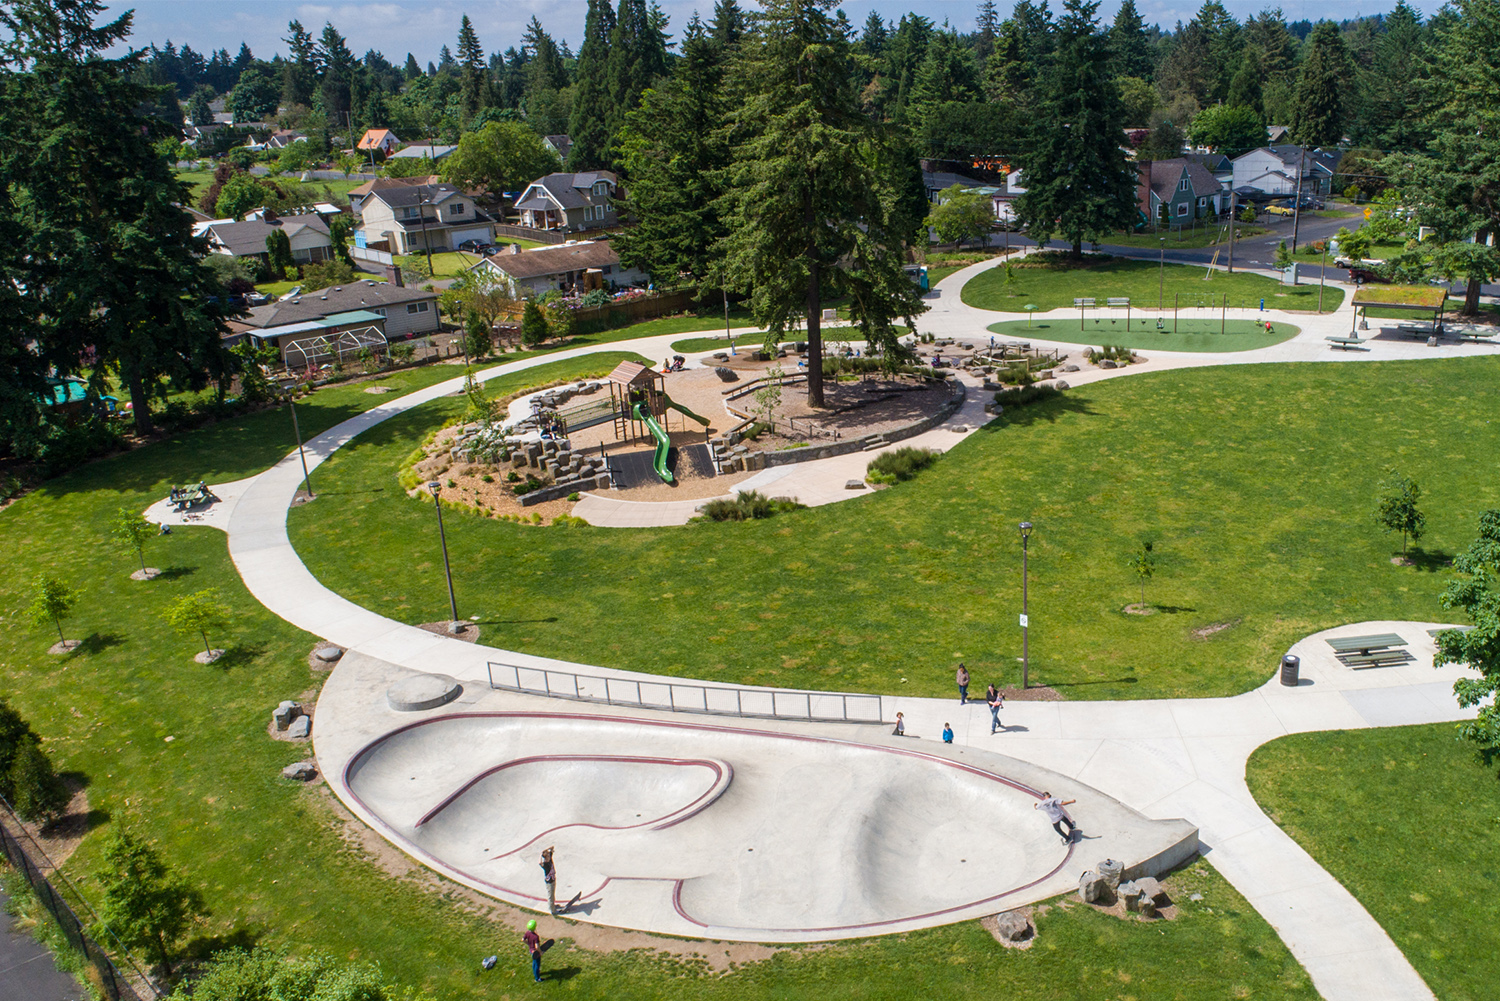  An aerial overview of Portland’s’ Khunamokwst Park which includes the Alberta Skate Spot 